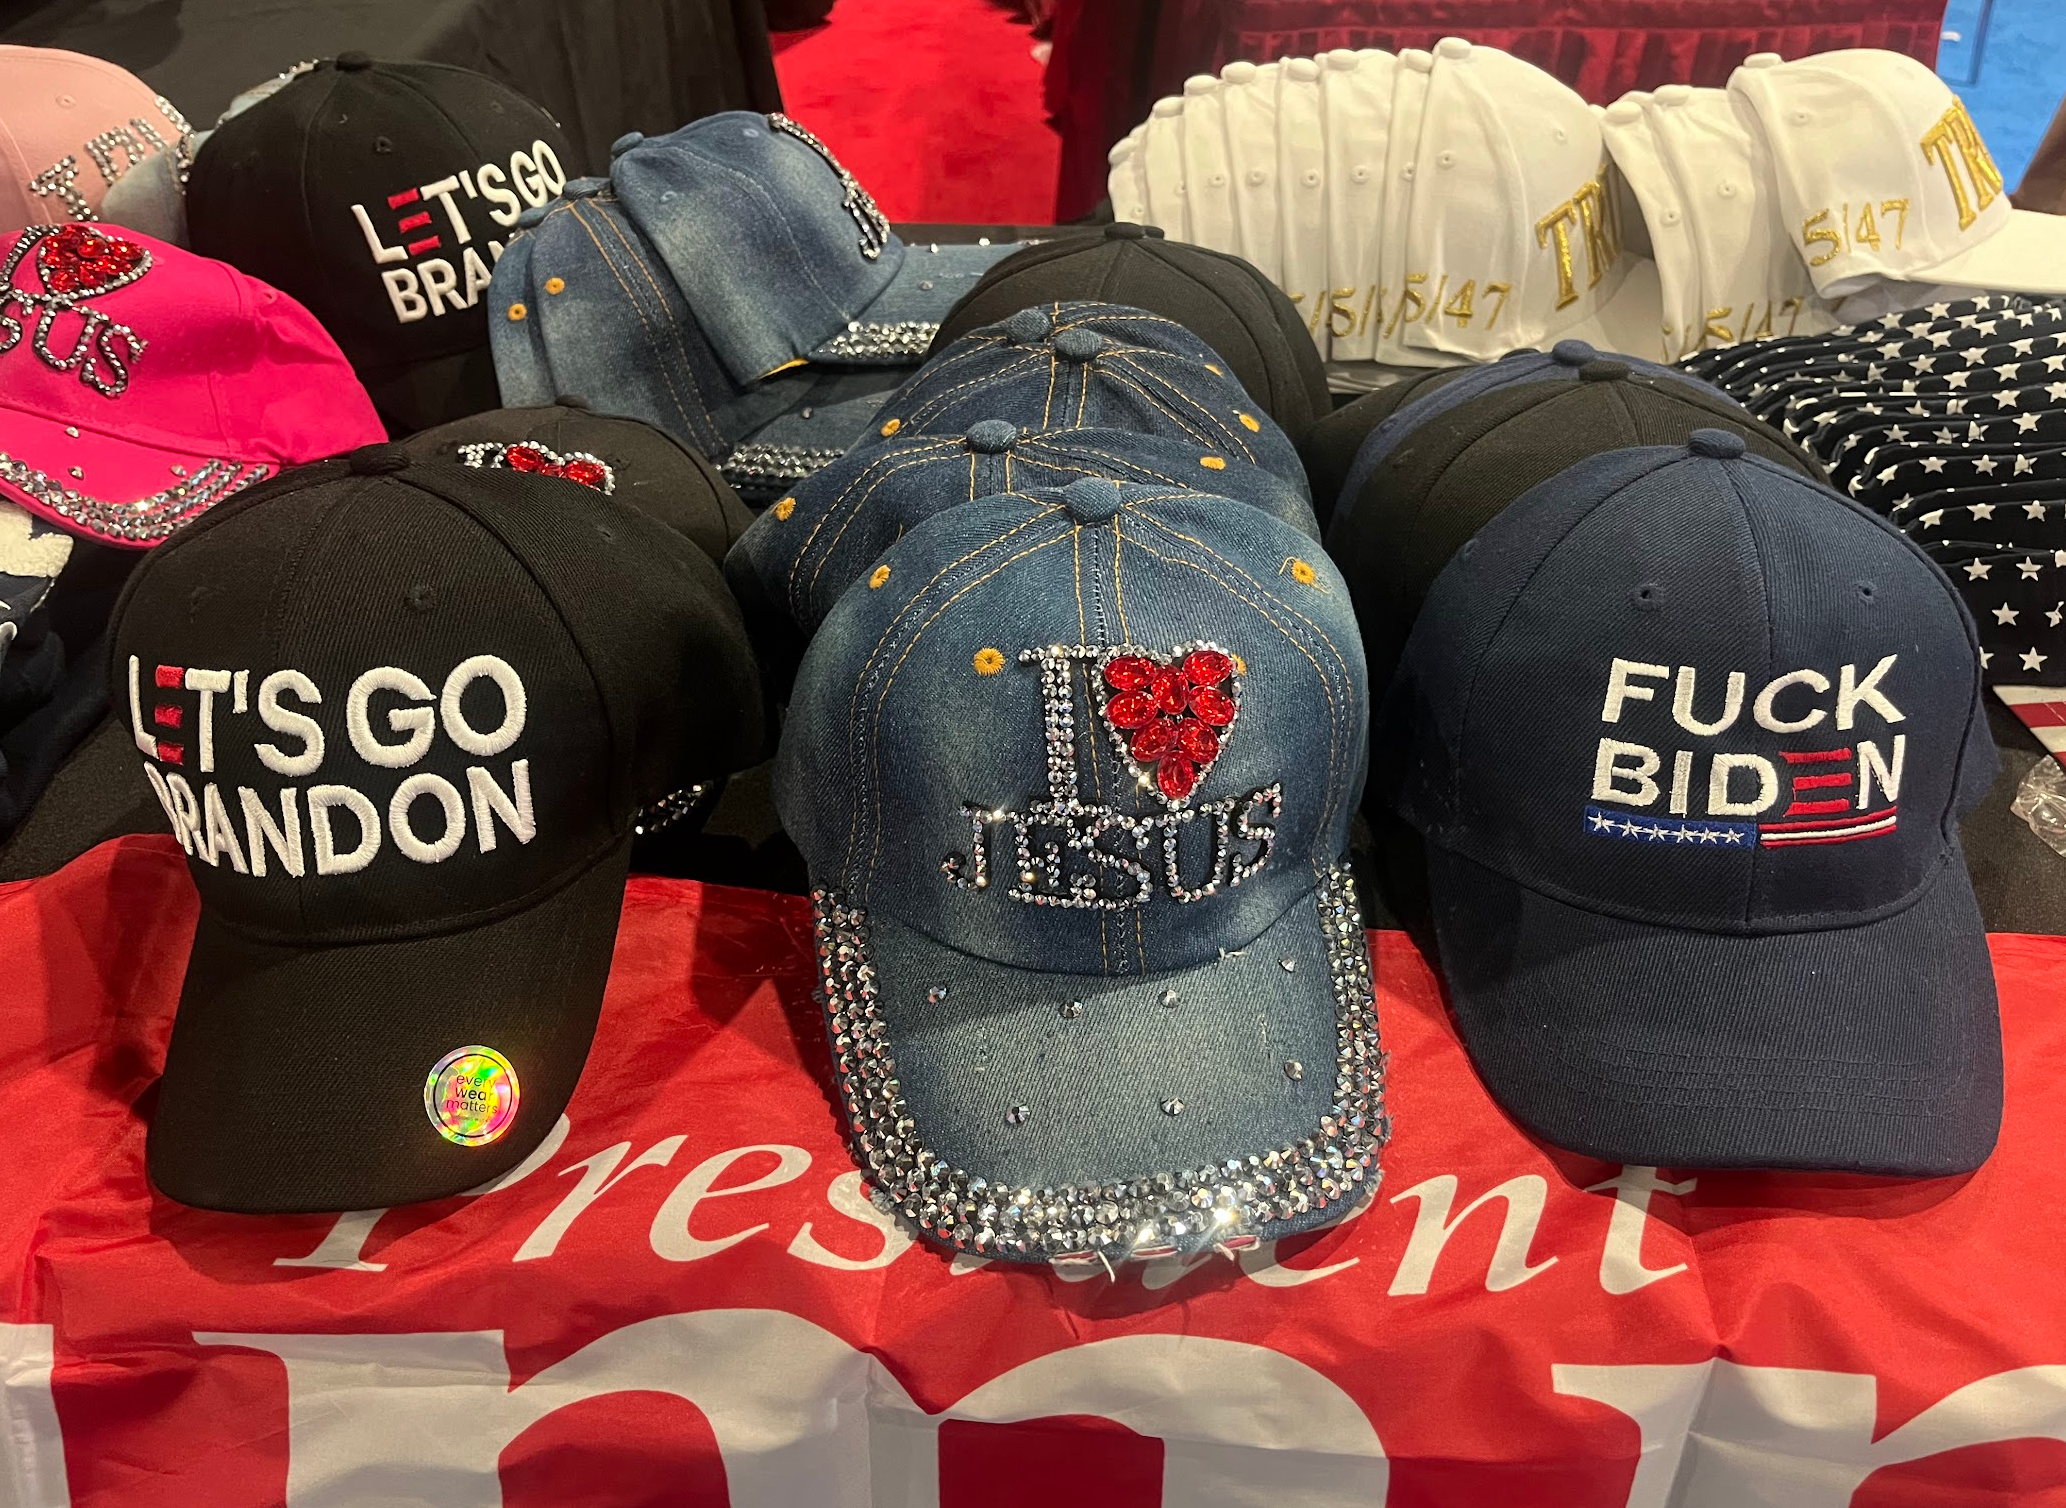 Rhinestone hats for those who love Jesus and hate Joe Biden were available at CPAC